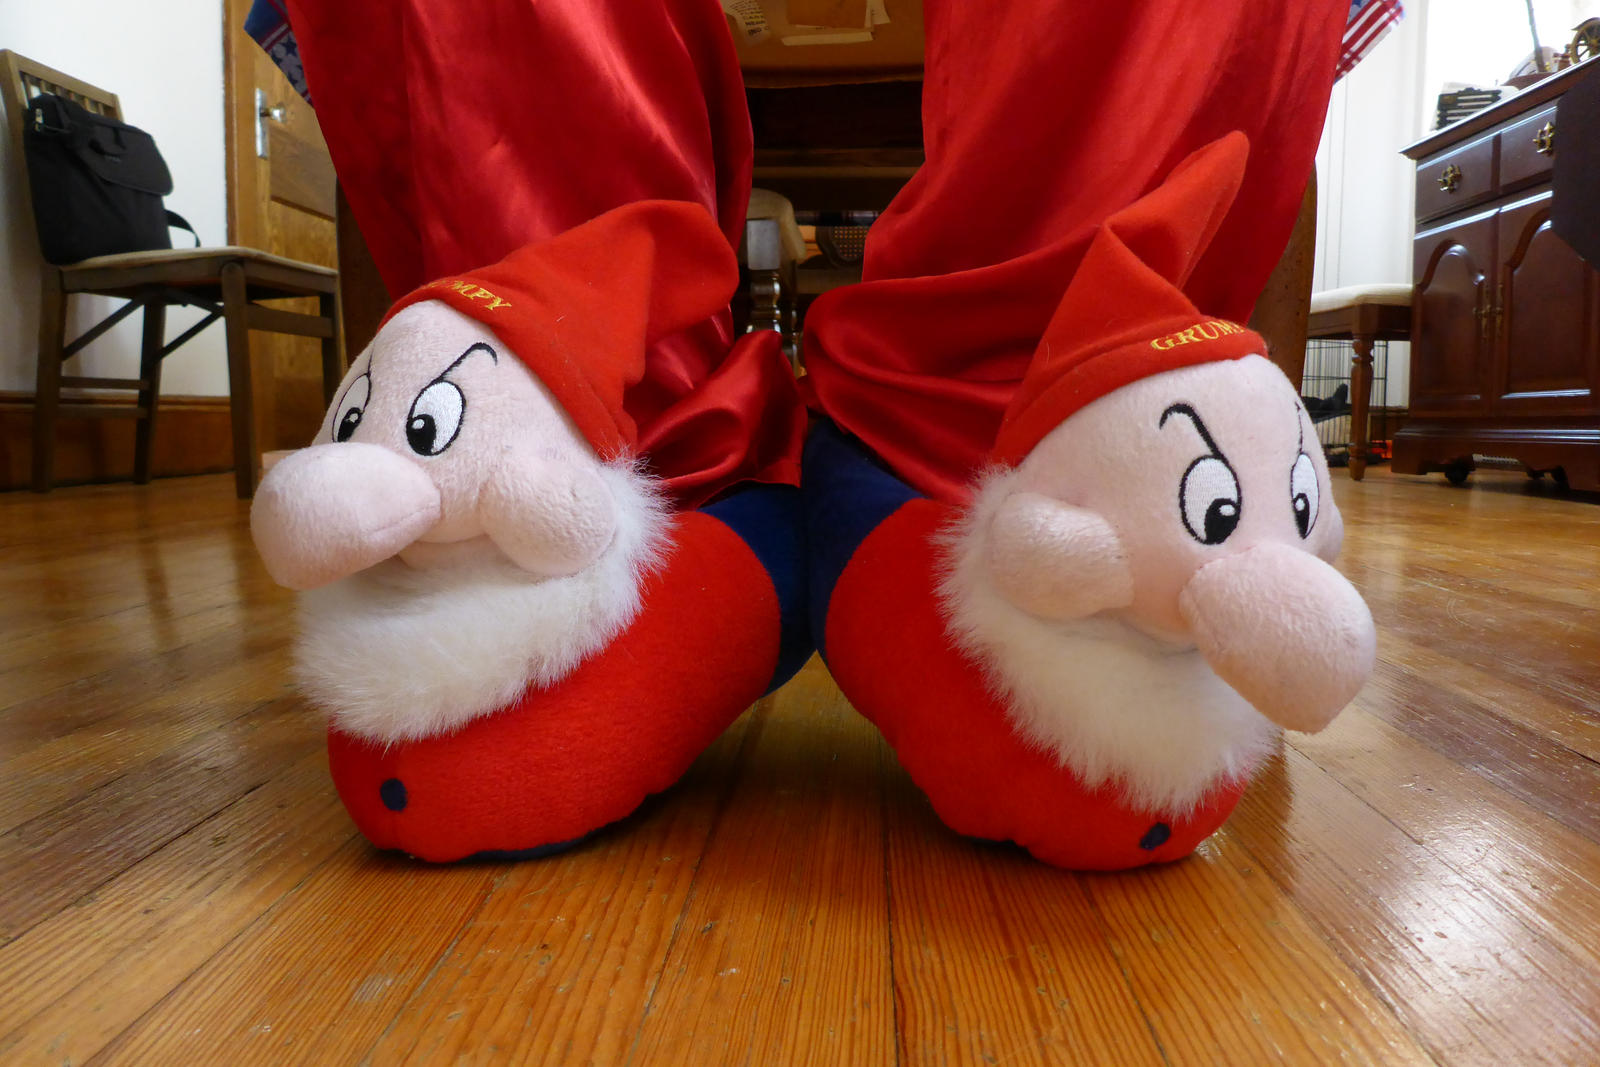 Grumpy slippers, front